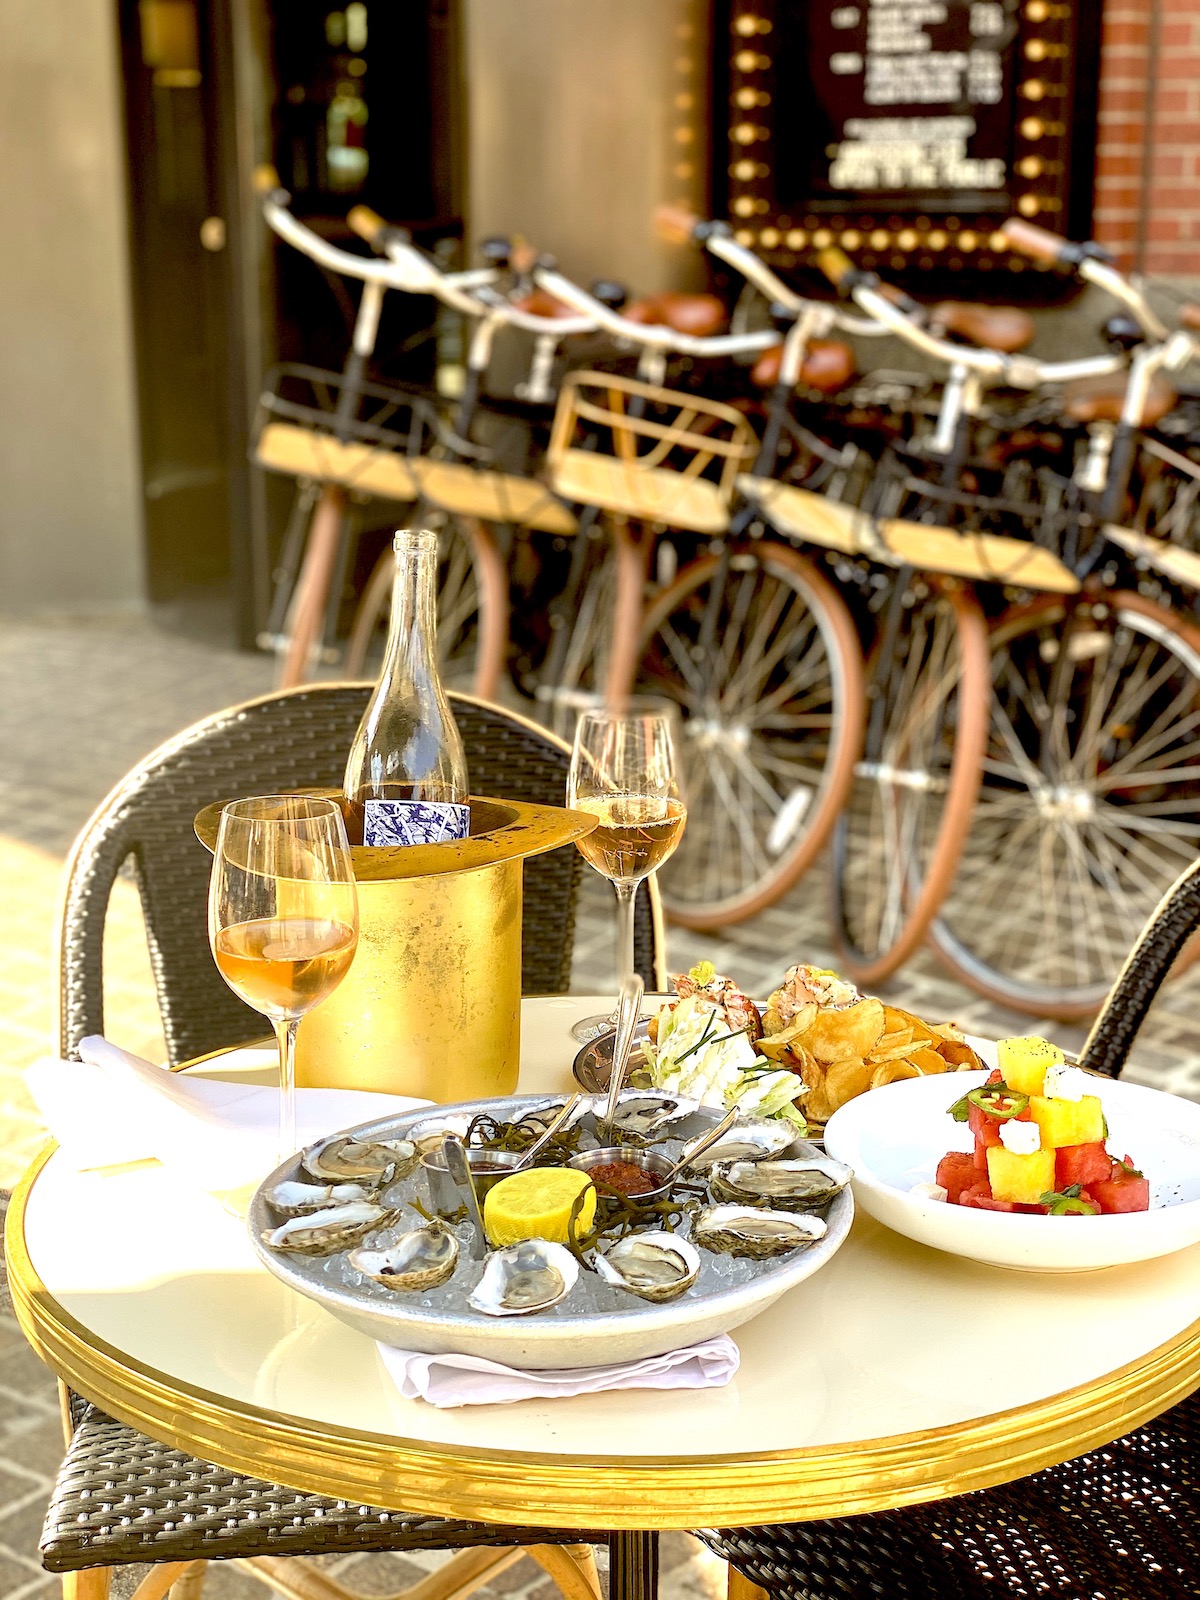 a spread of oysters, fruit and chips at an outdoor table. there is champagne chilling with two glasses next to it